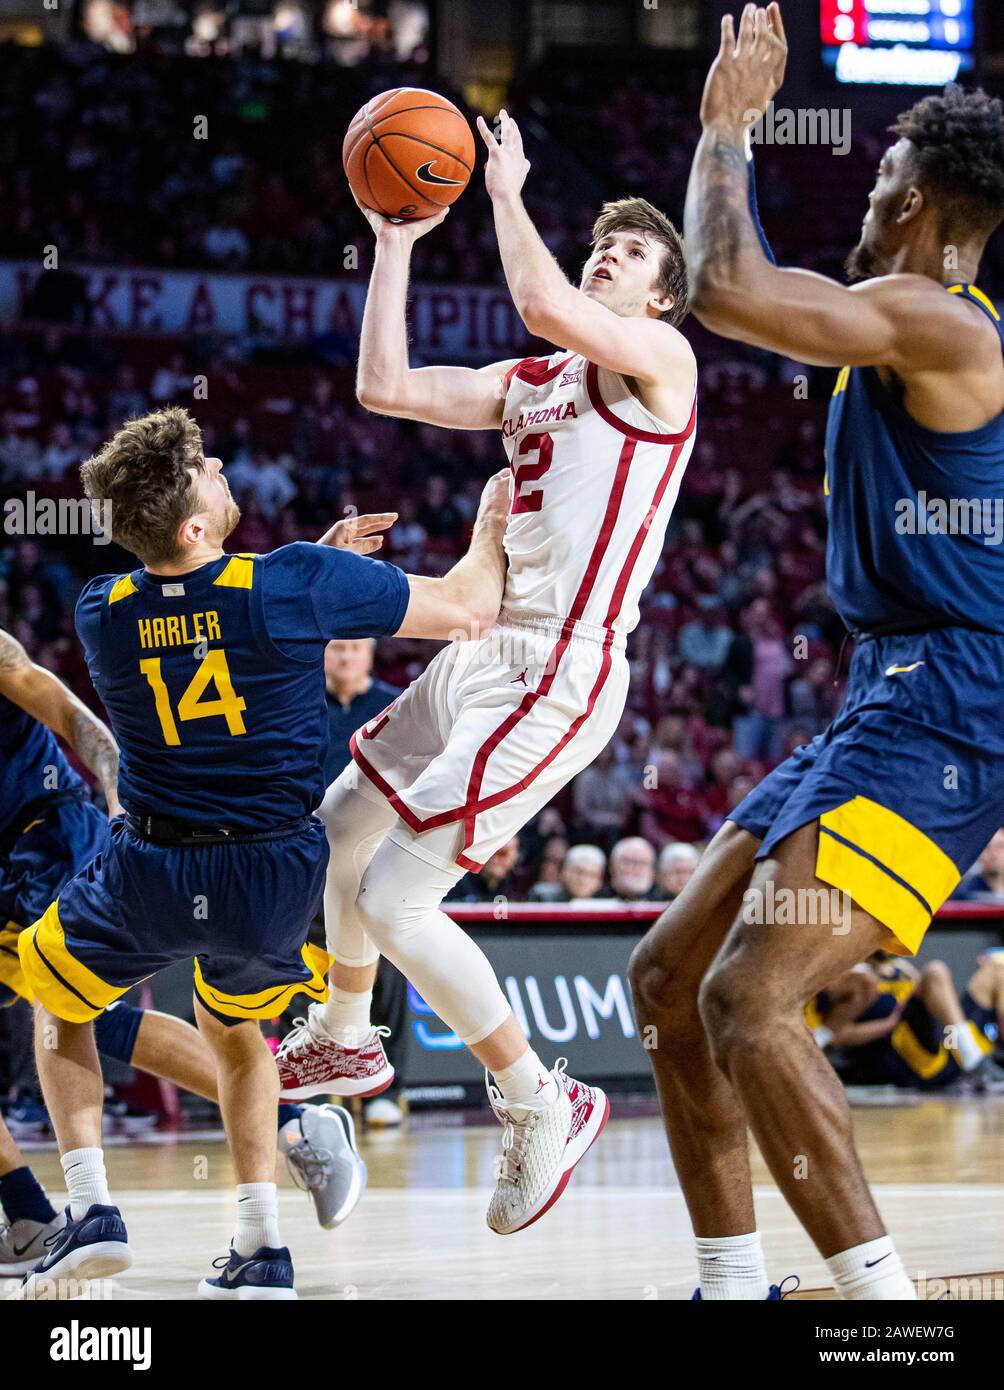 Norman, Oklahoma, USA. 8th Feb, 2020. Oklahoma Sooners guard Austin Reaves (12) shooting the basketball as West Virginia Mountaineers guard Chase Harler (14) draws the charging foul during the game on Saturday, February 8, 2020 at the Lloyd Noble Center in Norman, OK. Credit: Nicholas Rutledge/ZUMA Wire/Alamy Live News Stock Photo